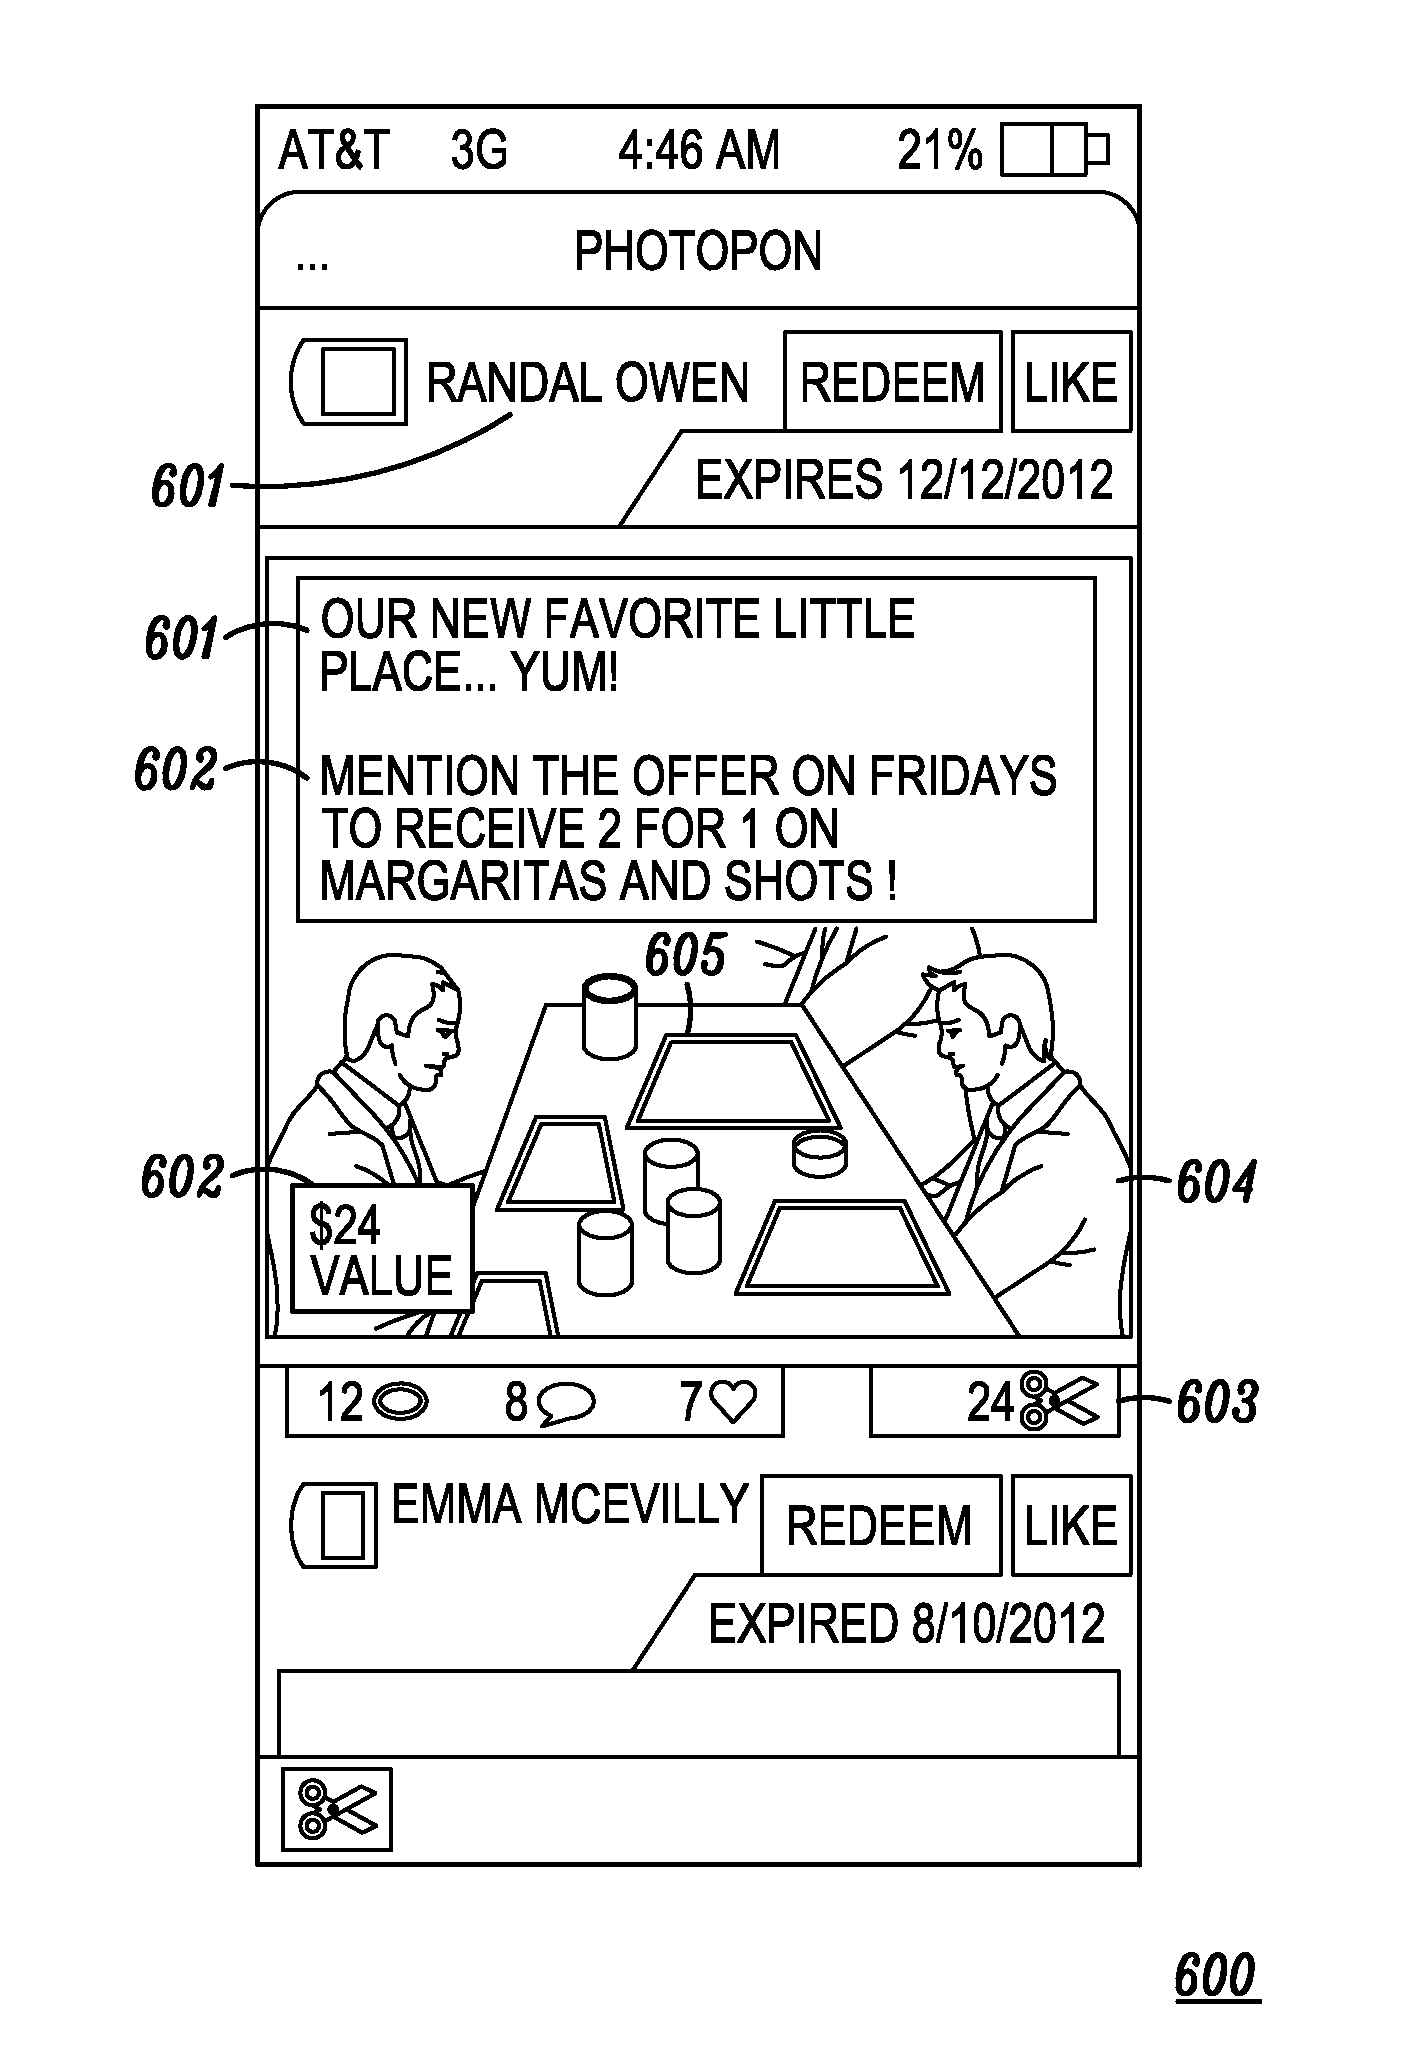 System and method for experience-sharing within a computer network